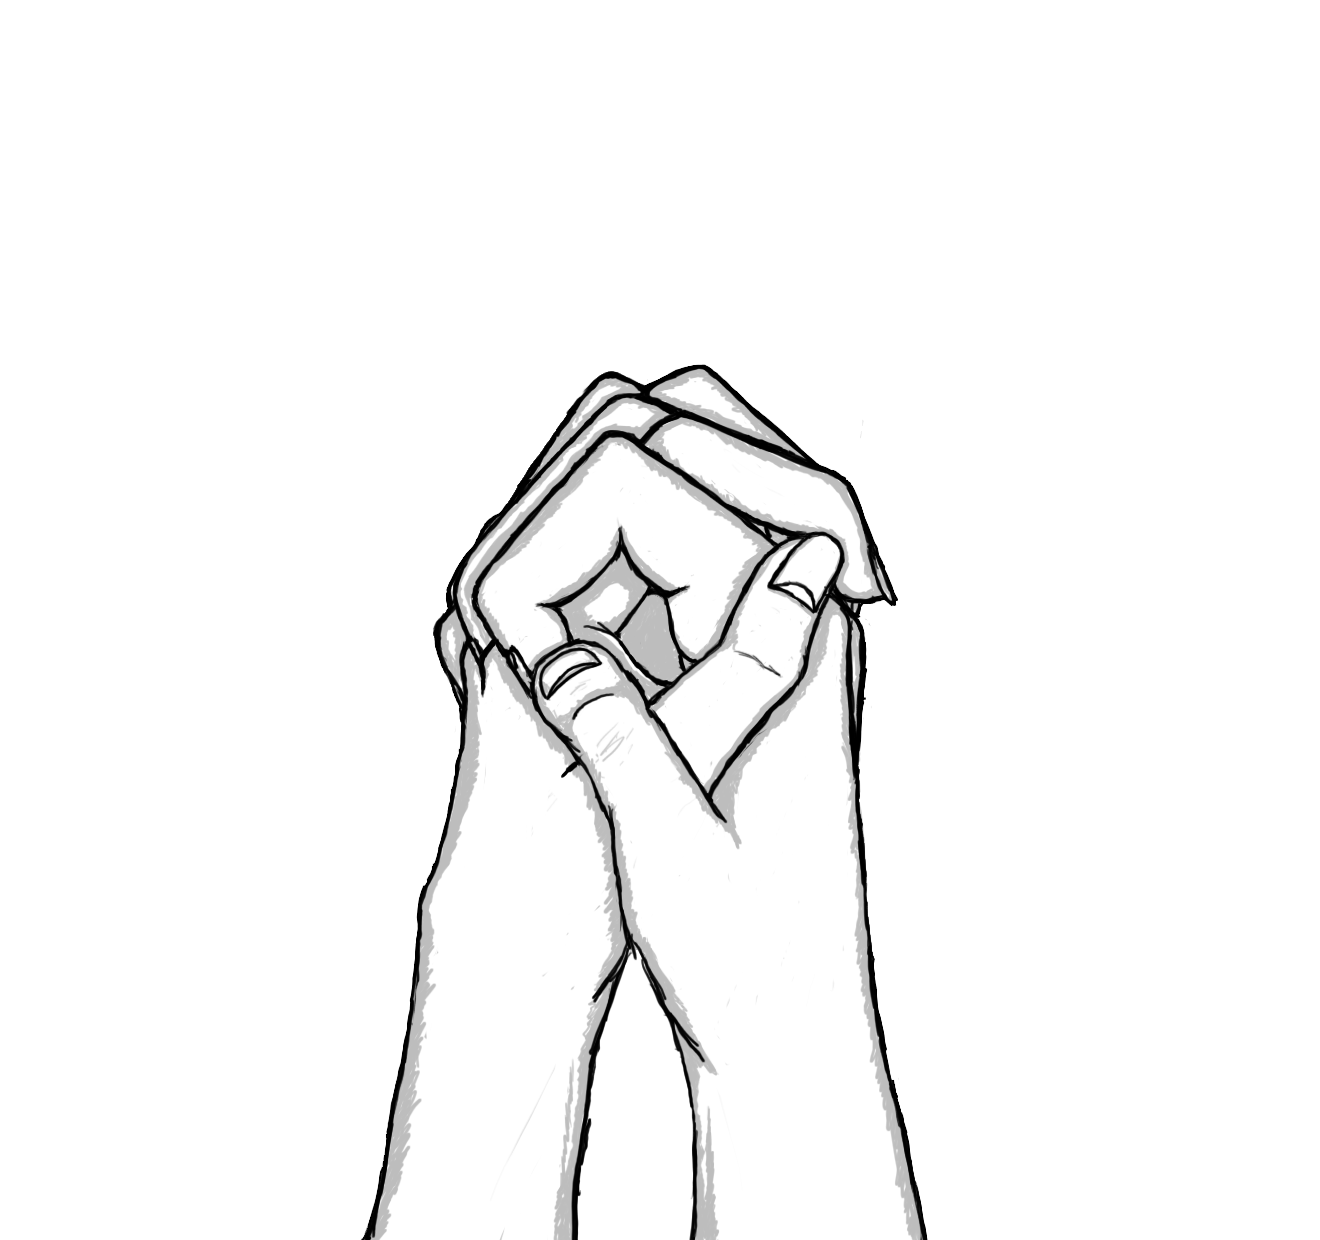 Line Drawing Of Hands